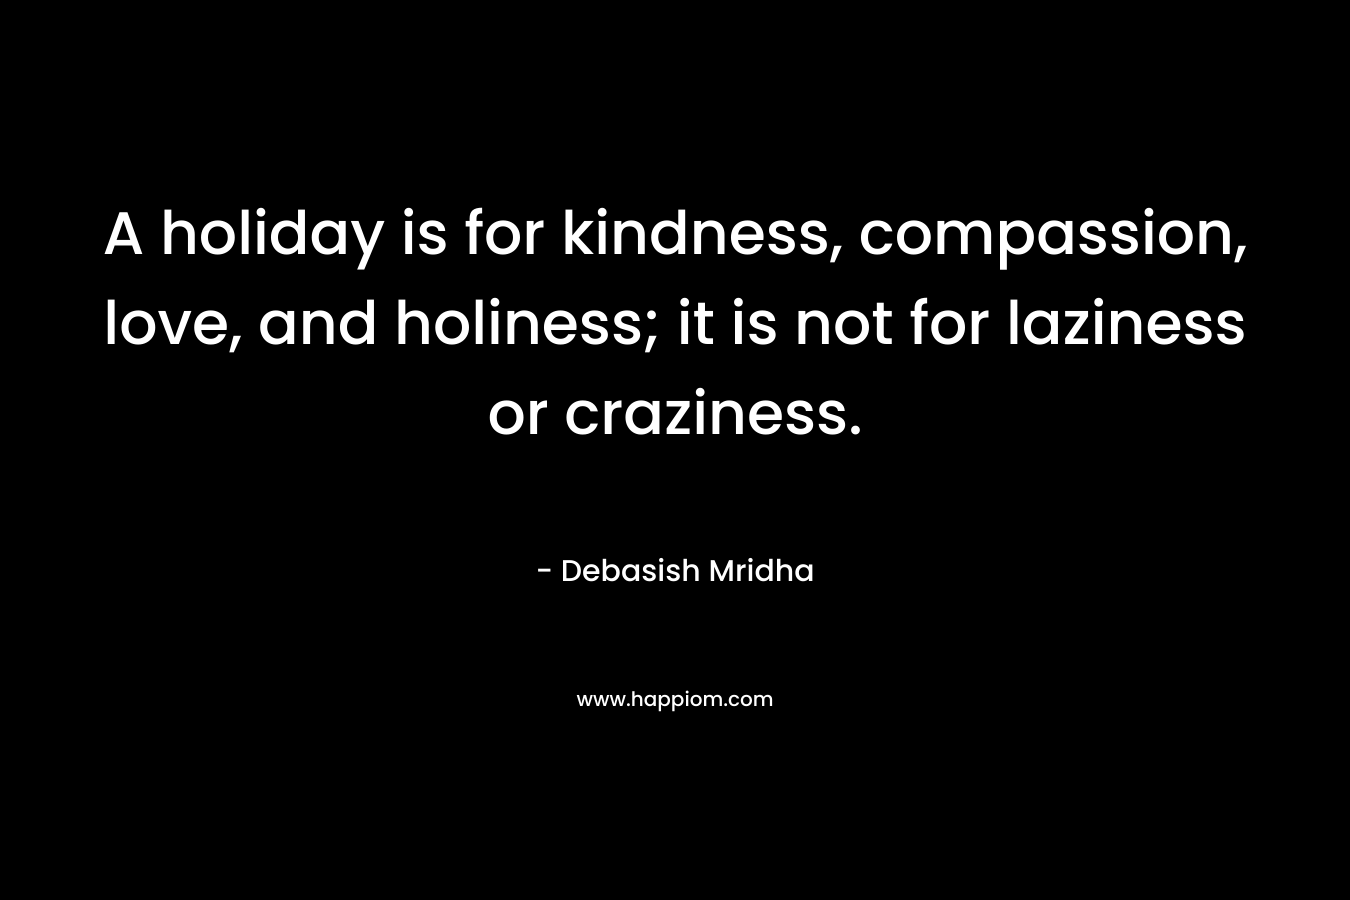 A holiday is for kindness, compassion, love, and holiness; it is not for laziness or craziness.